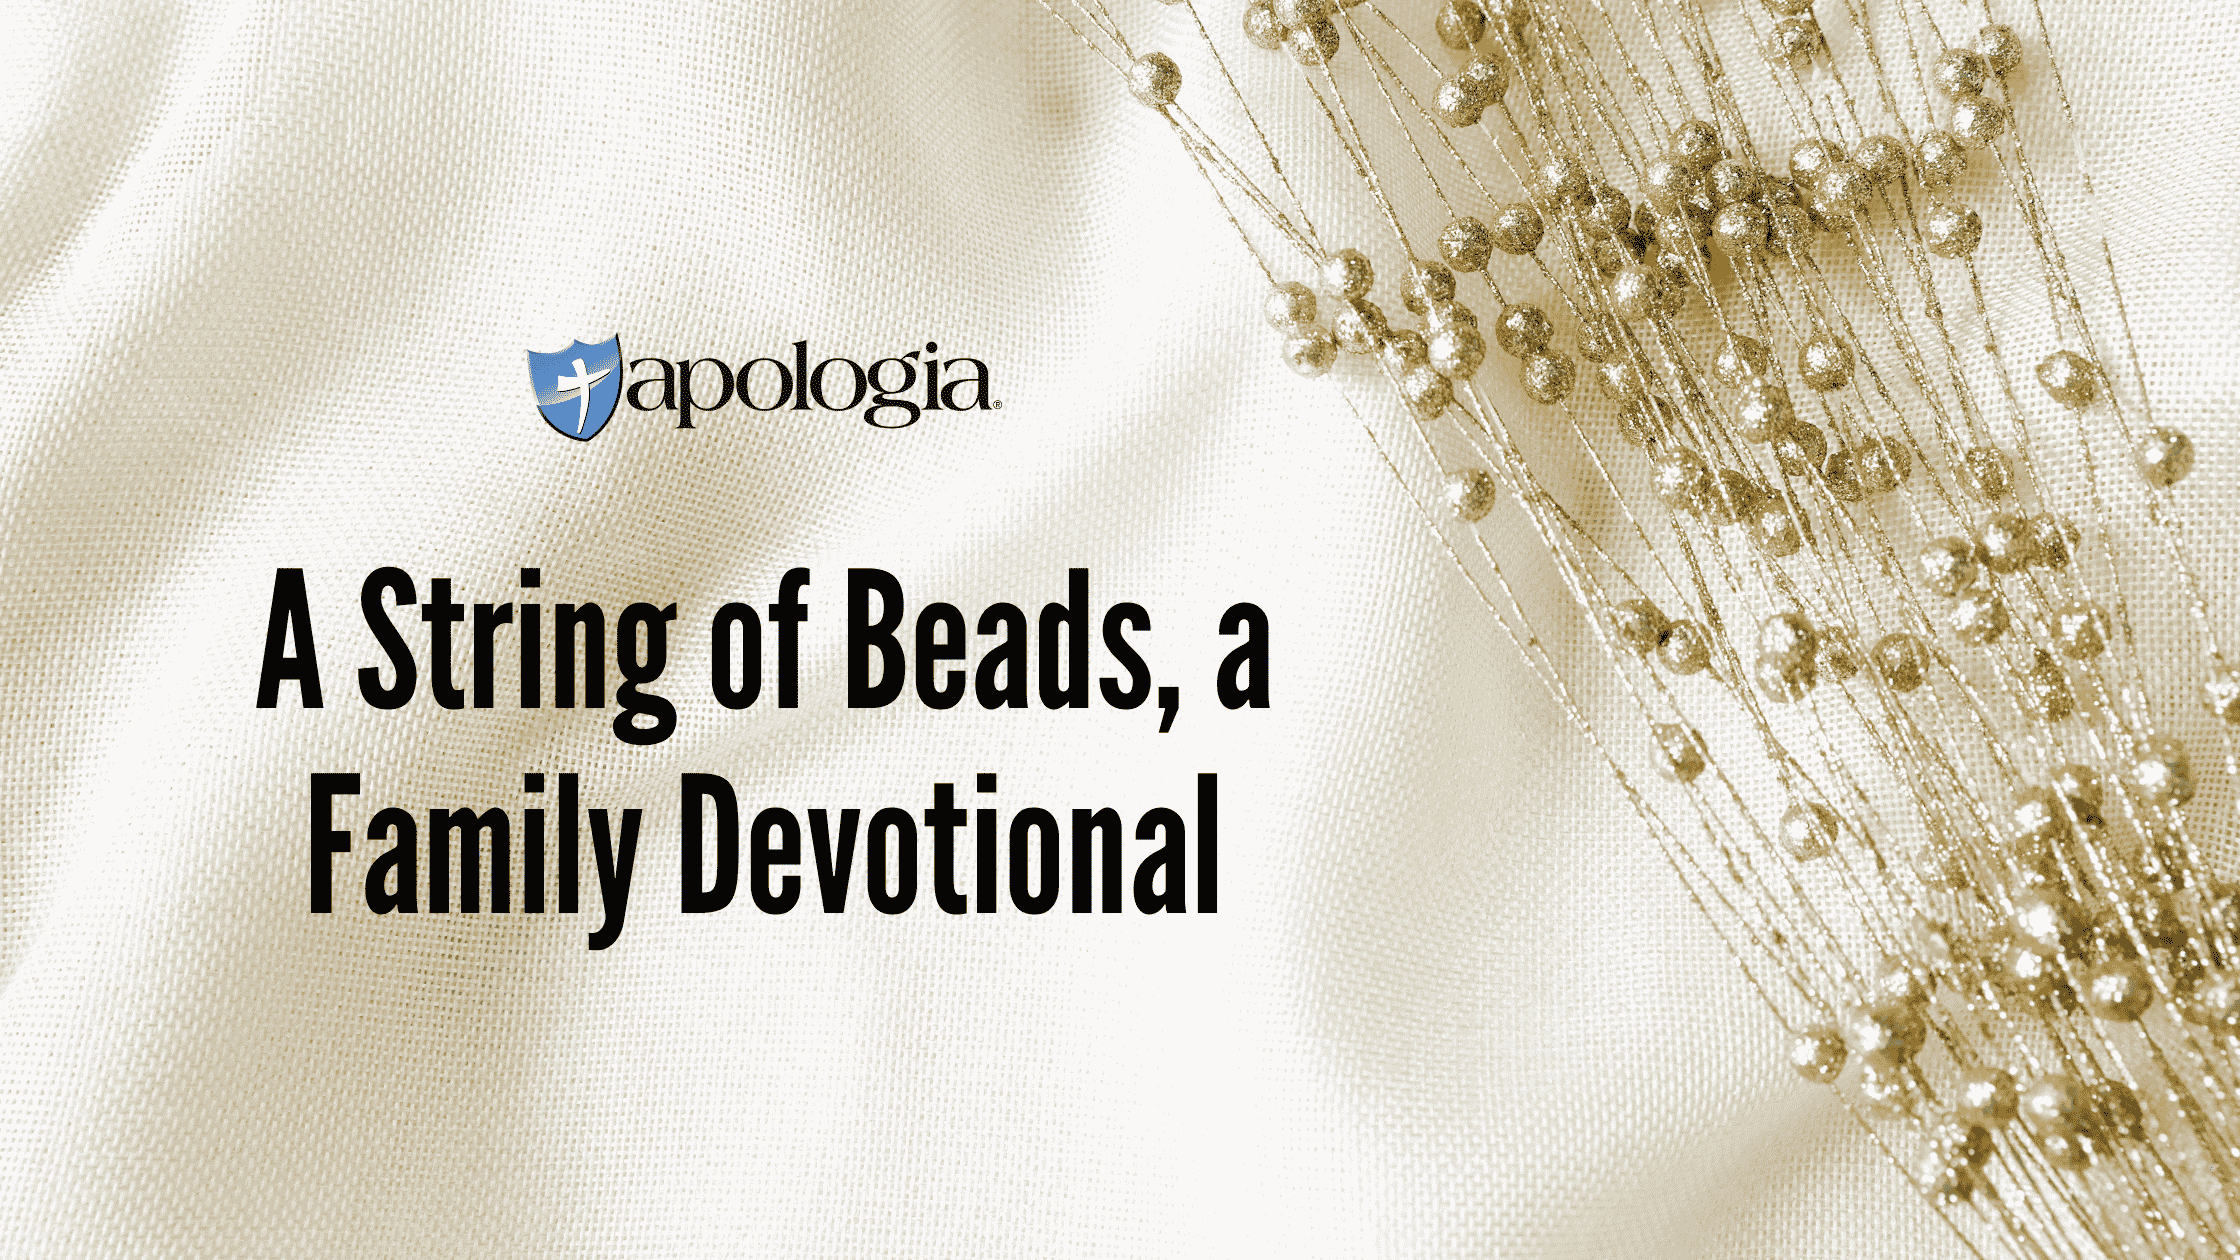 A String of Beads, a Family Devotional